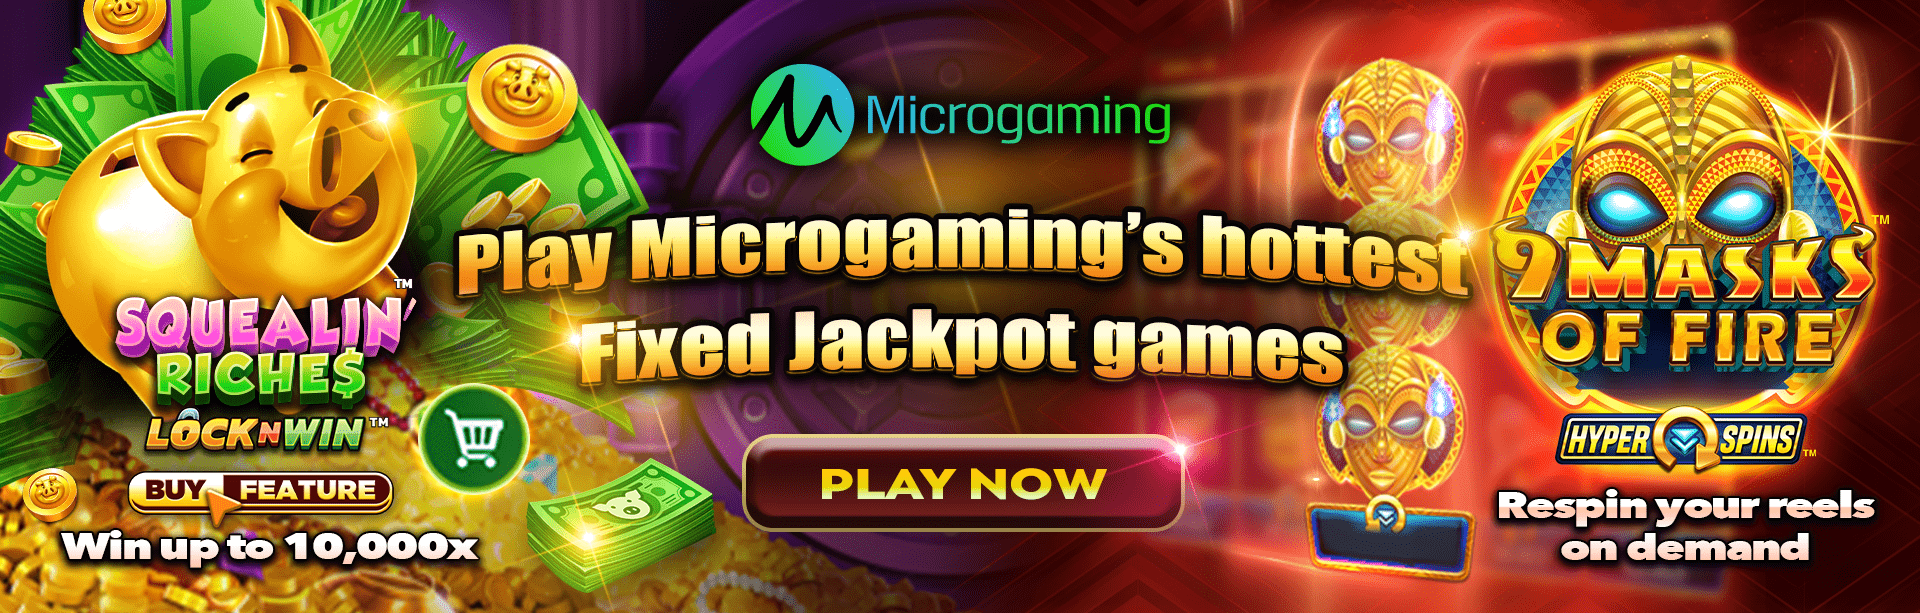 Microgaming Hottest Fixed Jackpot Games